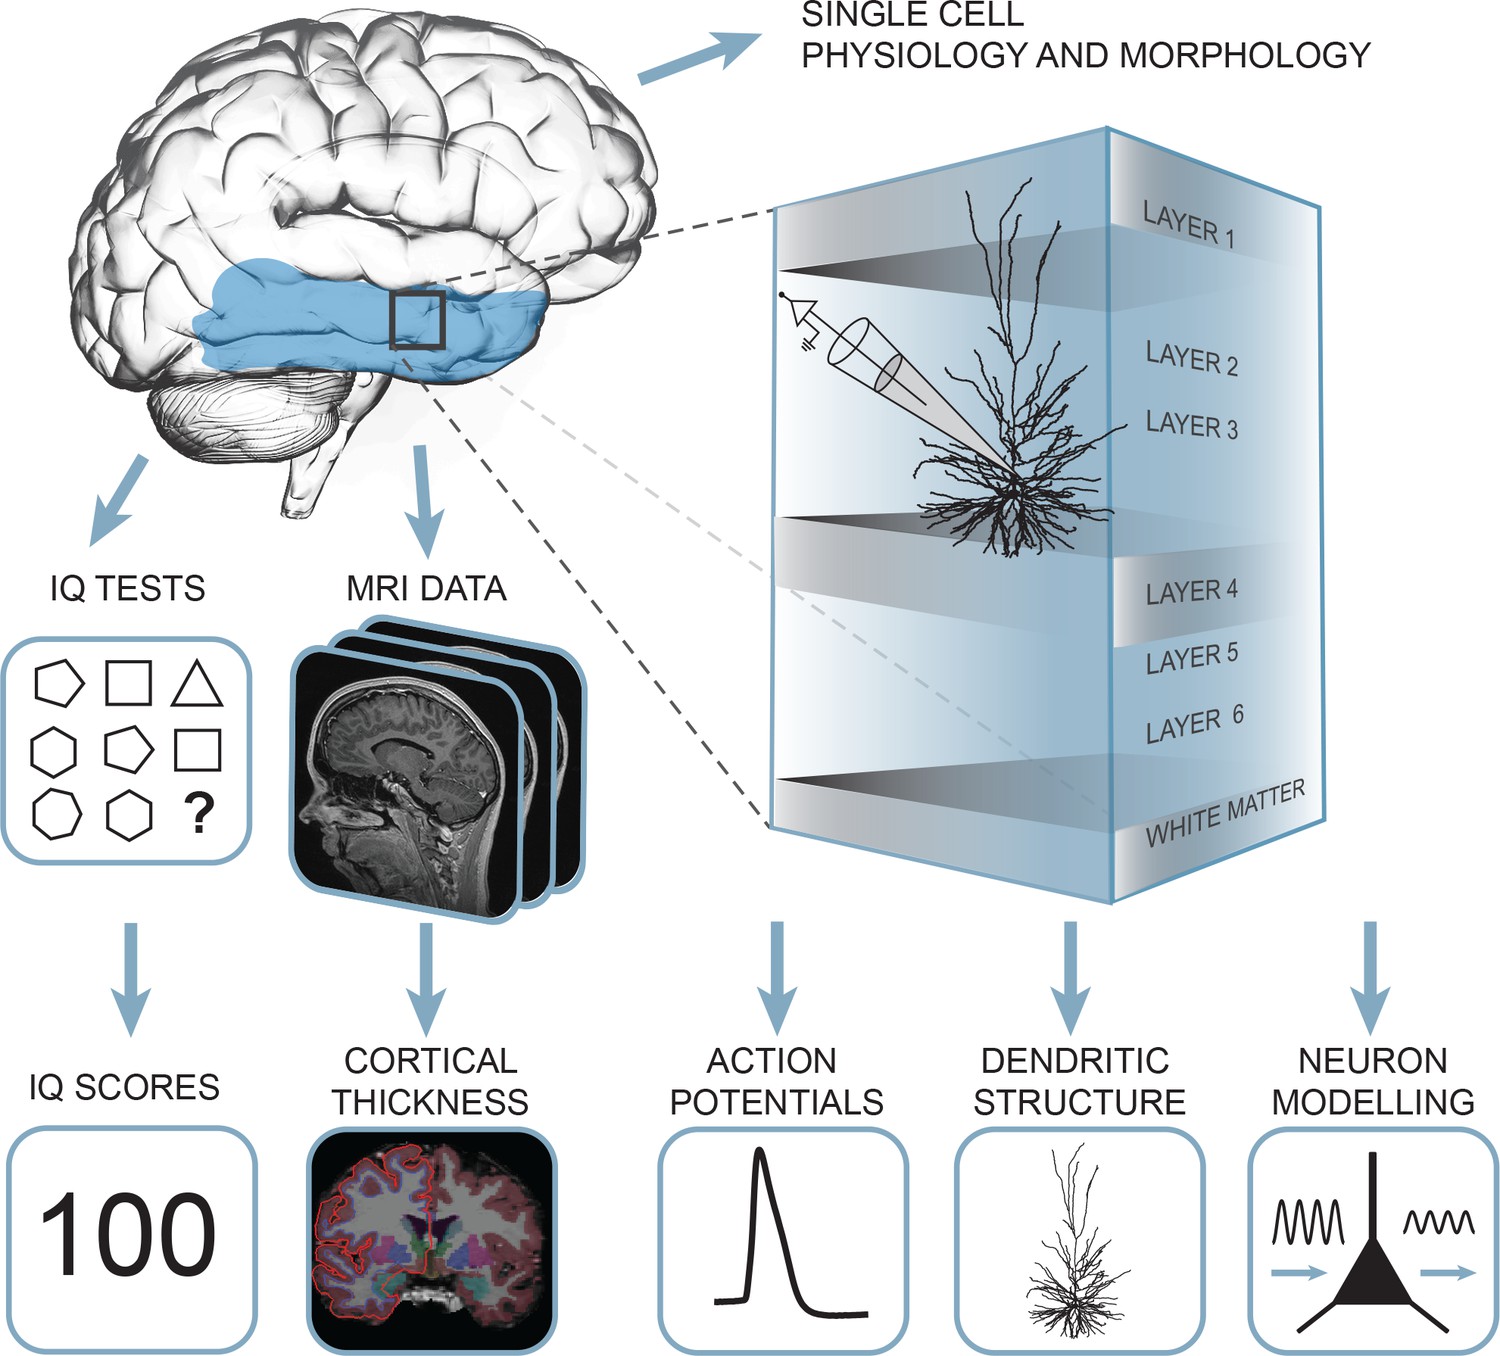 Large and fast human pyramidal neurons associate with intelligence ...